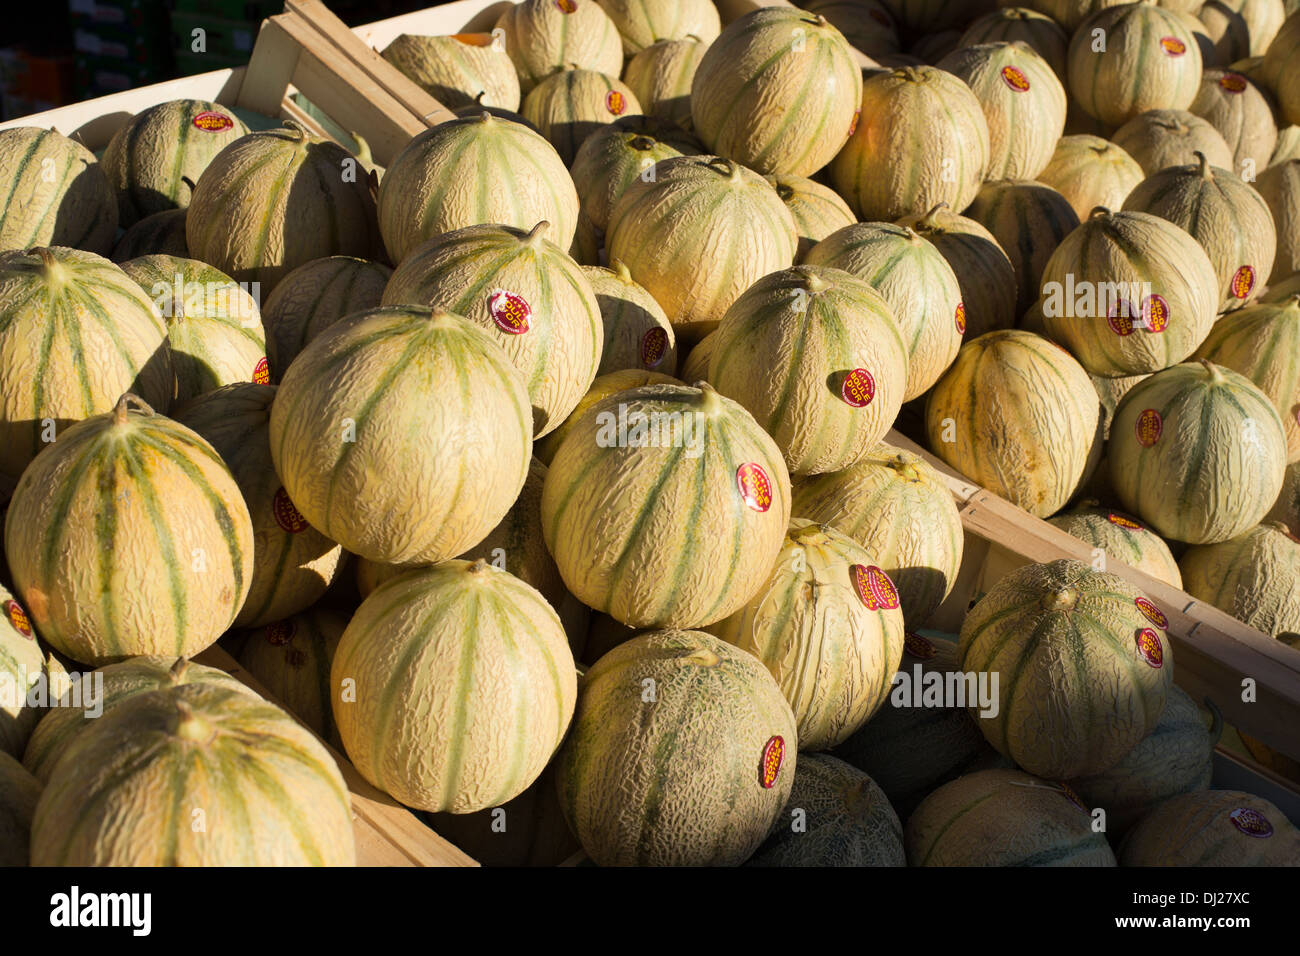 Melons for sale at a traditional open air market Stock Photo